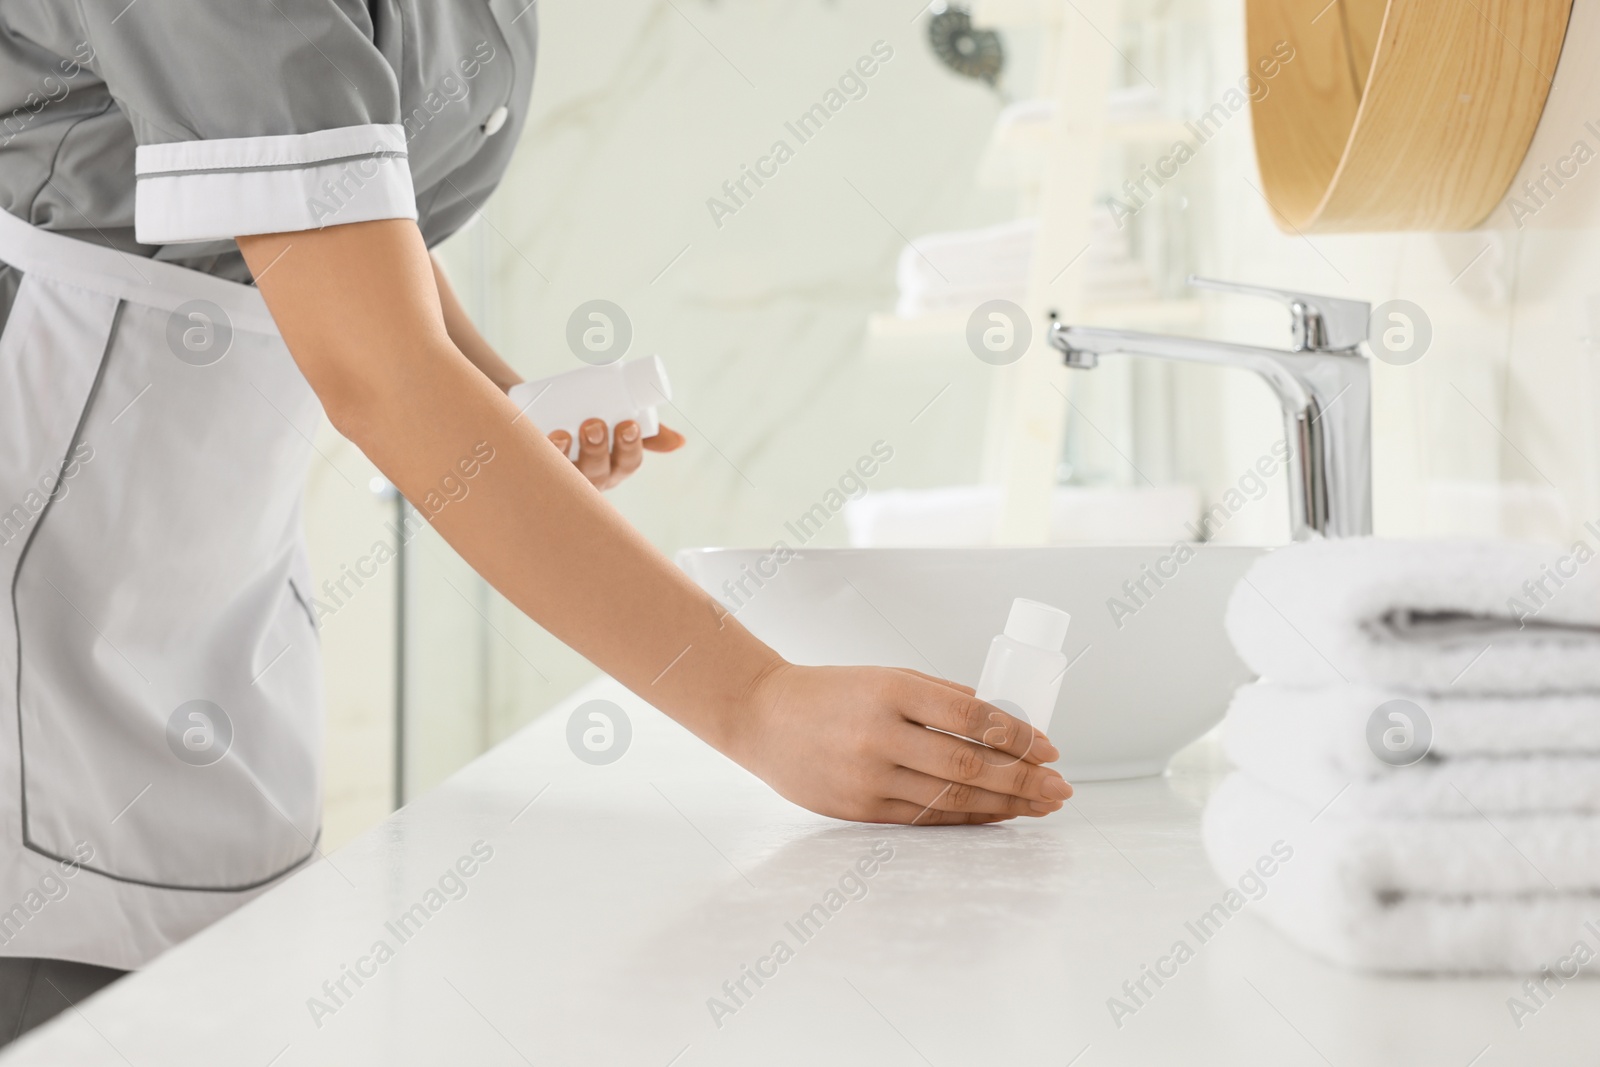 Photo of Chambermaid putting bottle of shampoo on bathroom counter in hotel, closeup